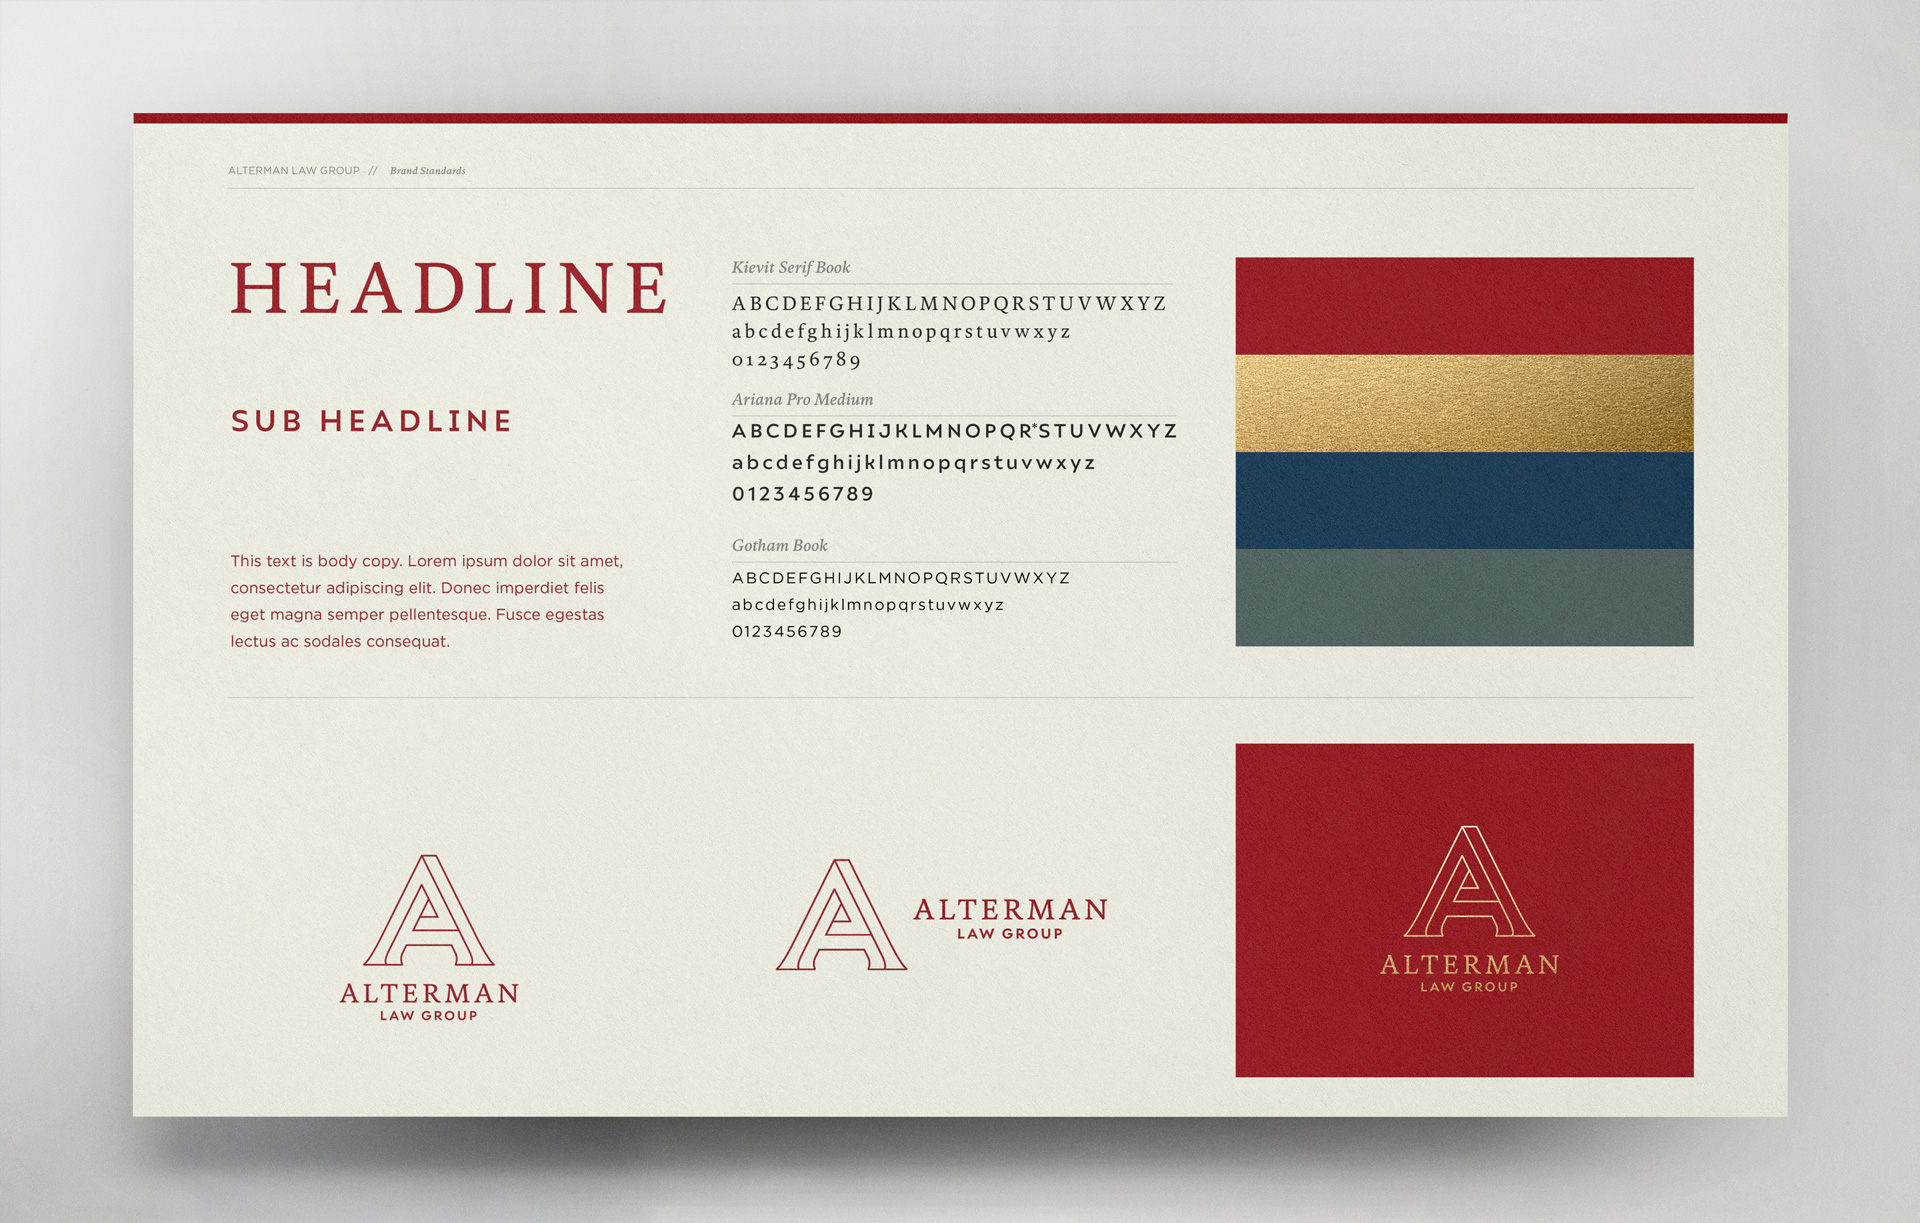 Alterman Law Logo branding created by Incubate Design